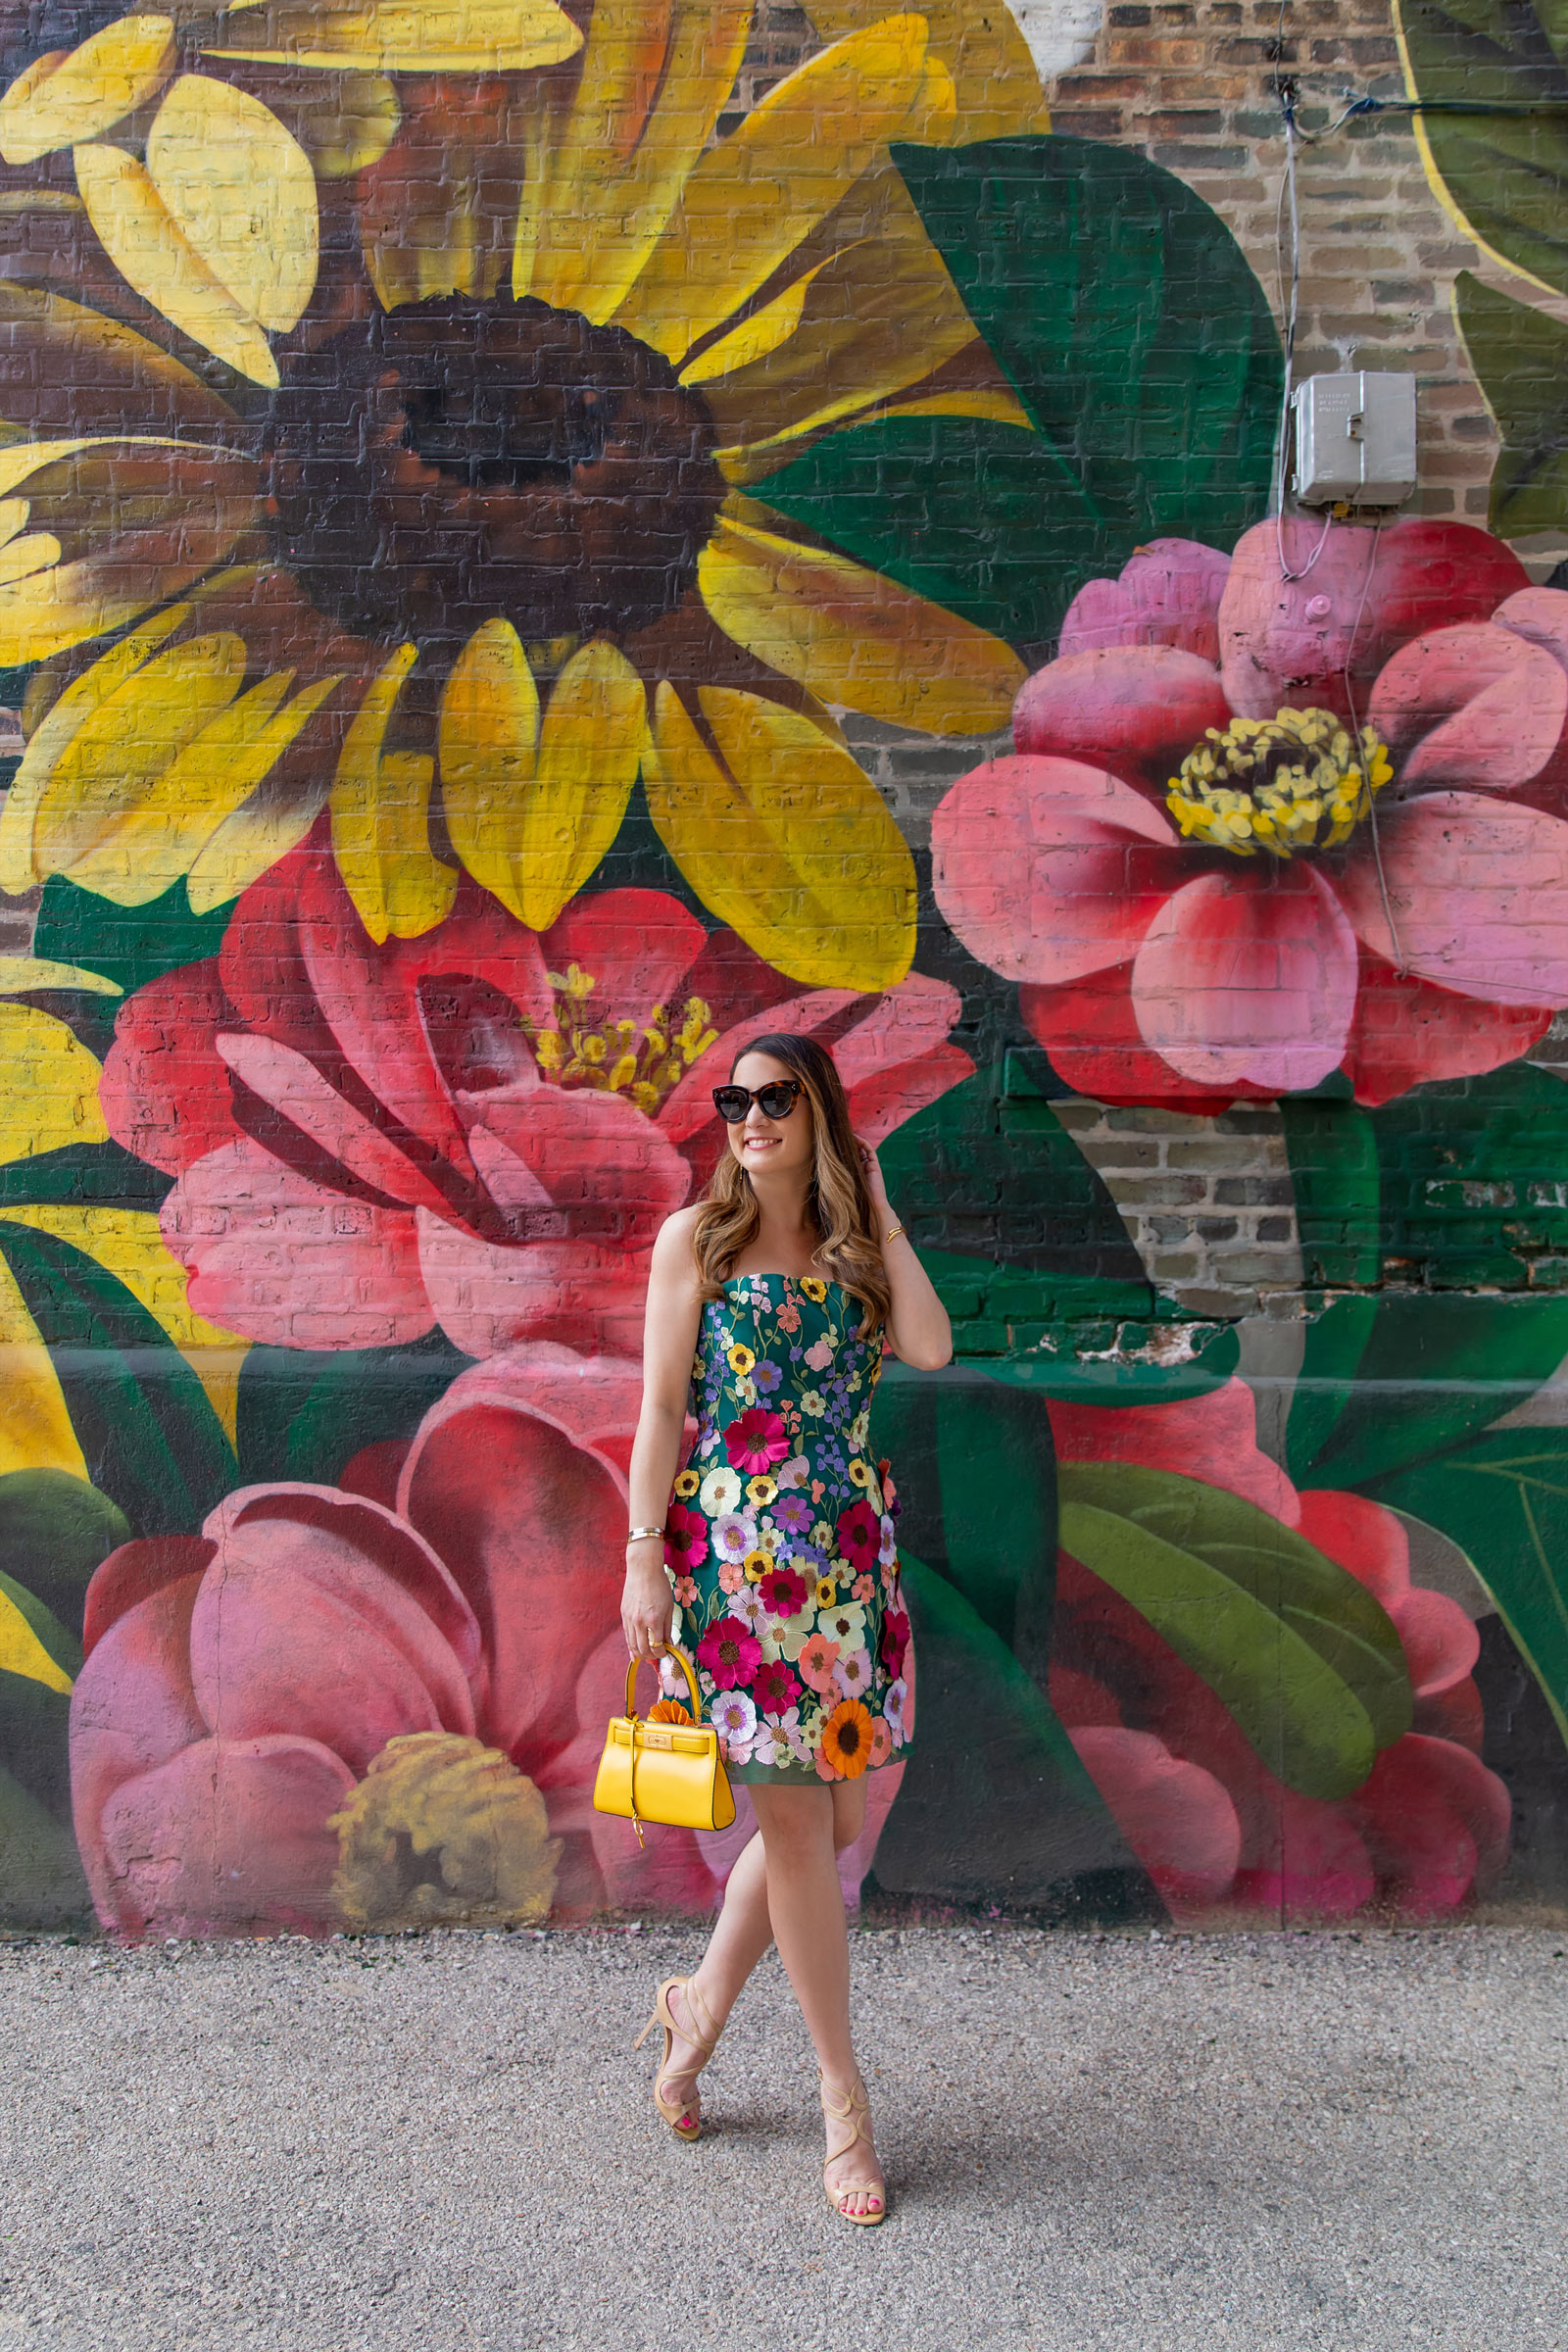 Chicago Floral Mural